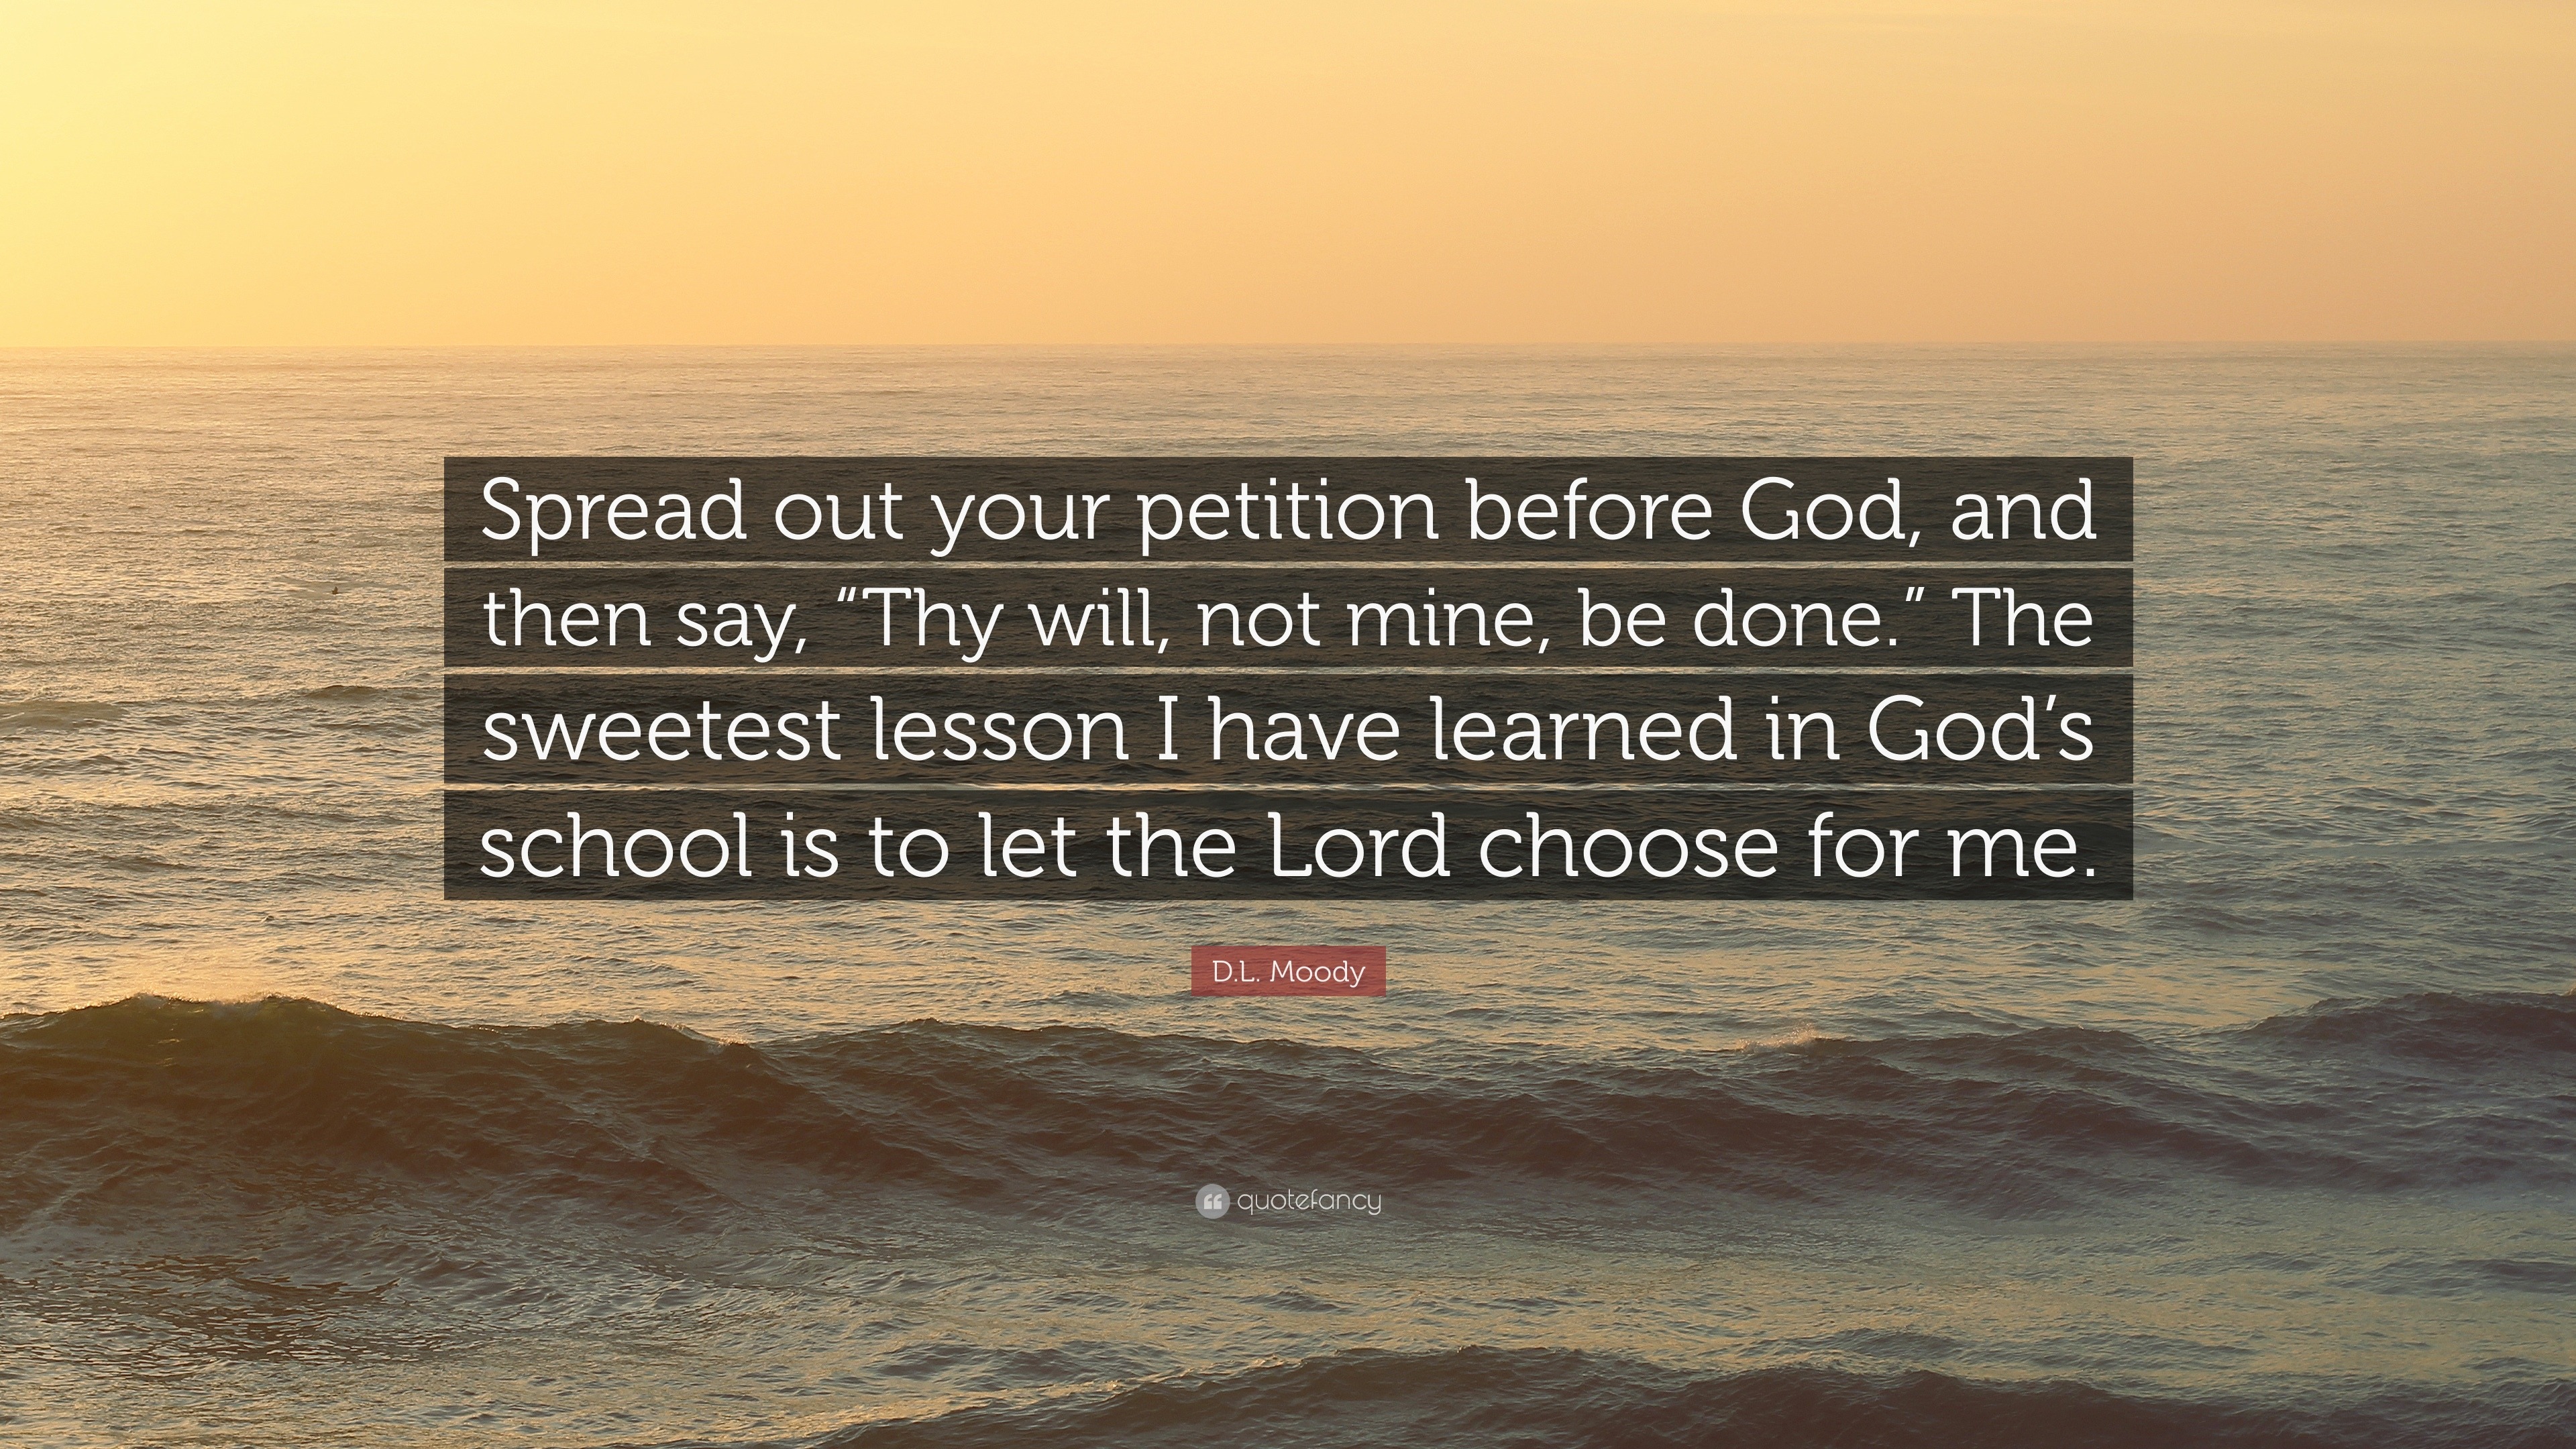 https://quotefancy.com/media/wallpaper/3840x2160/1858246-D-L-Moody-Quote-Spread-out-your-petition-before-God-and-then-say.jpg